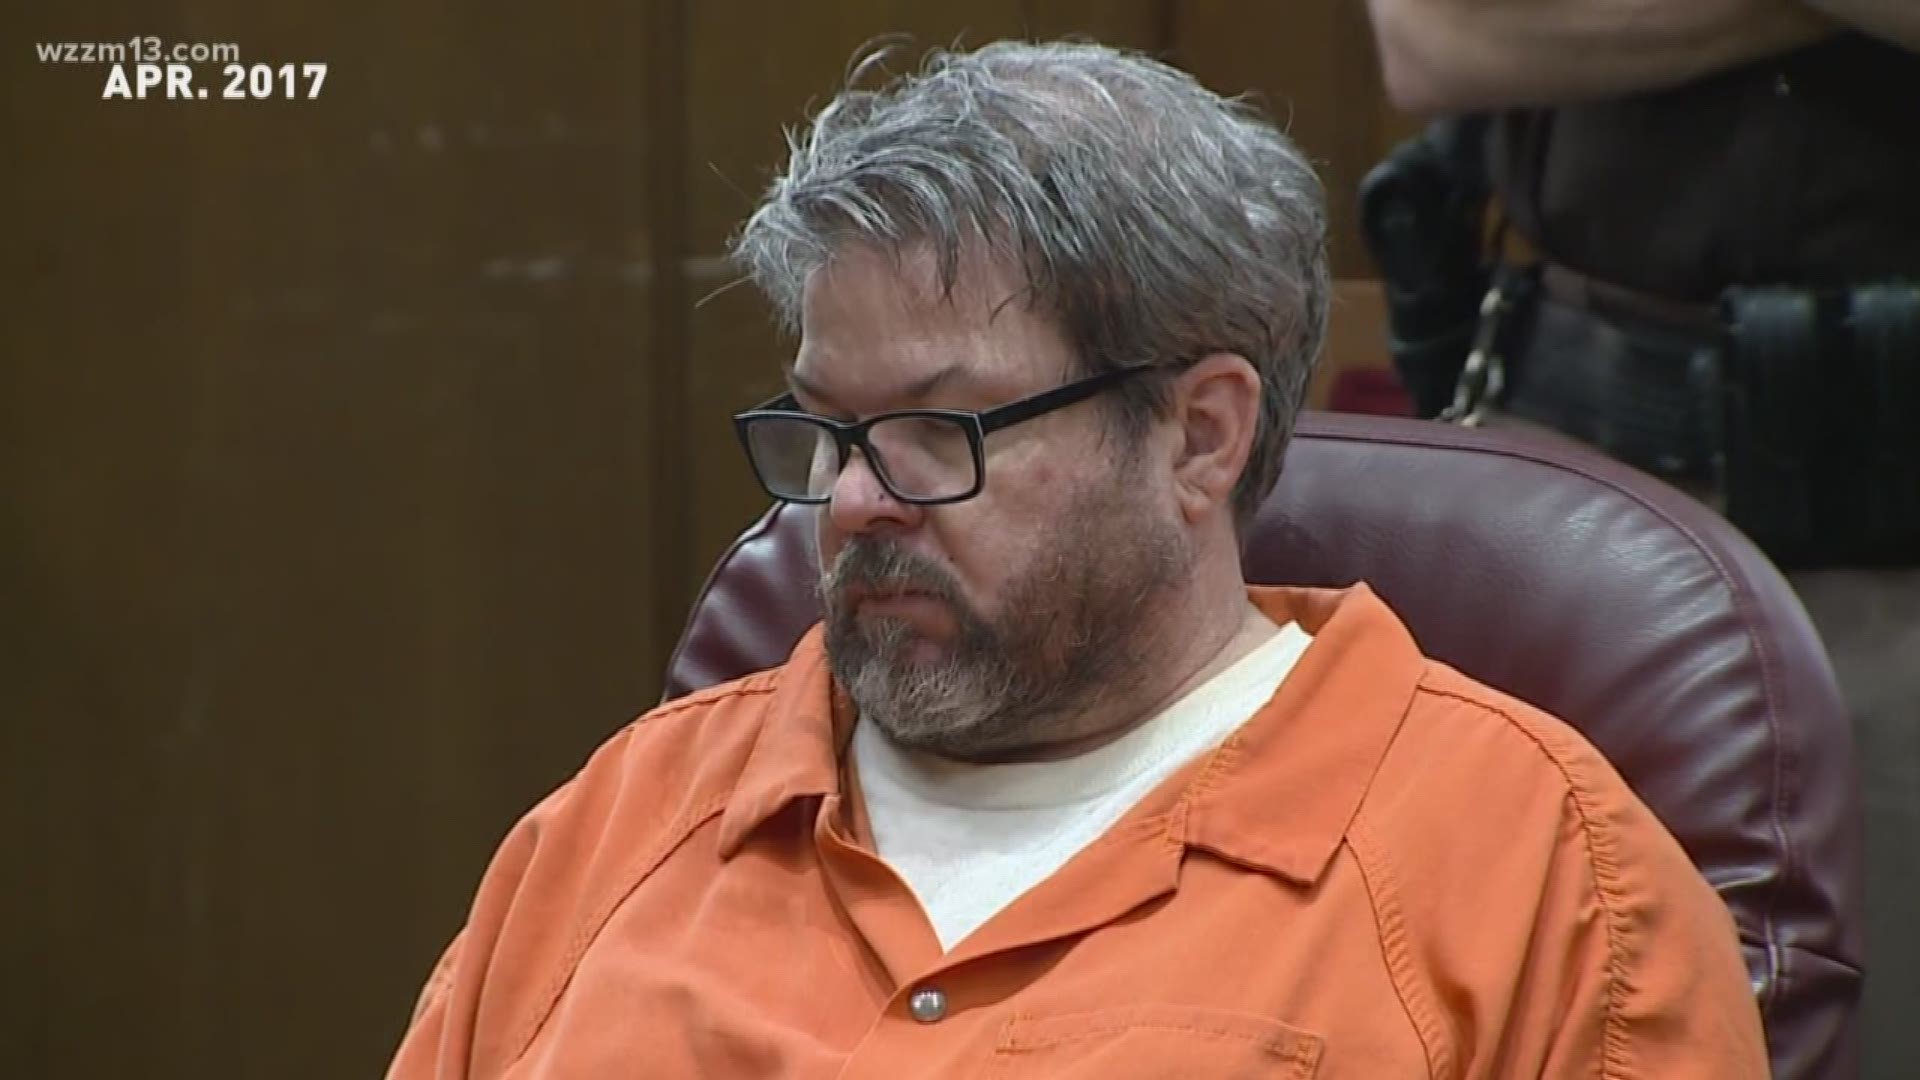 Almost a month after he pleaded guilty to murdering 6 people, Jason Dalton will be sentenced Tuesday.